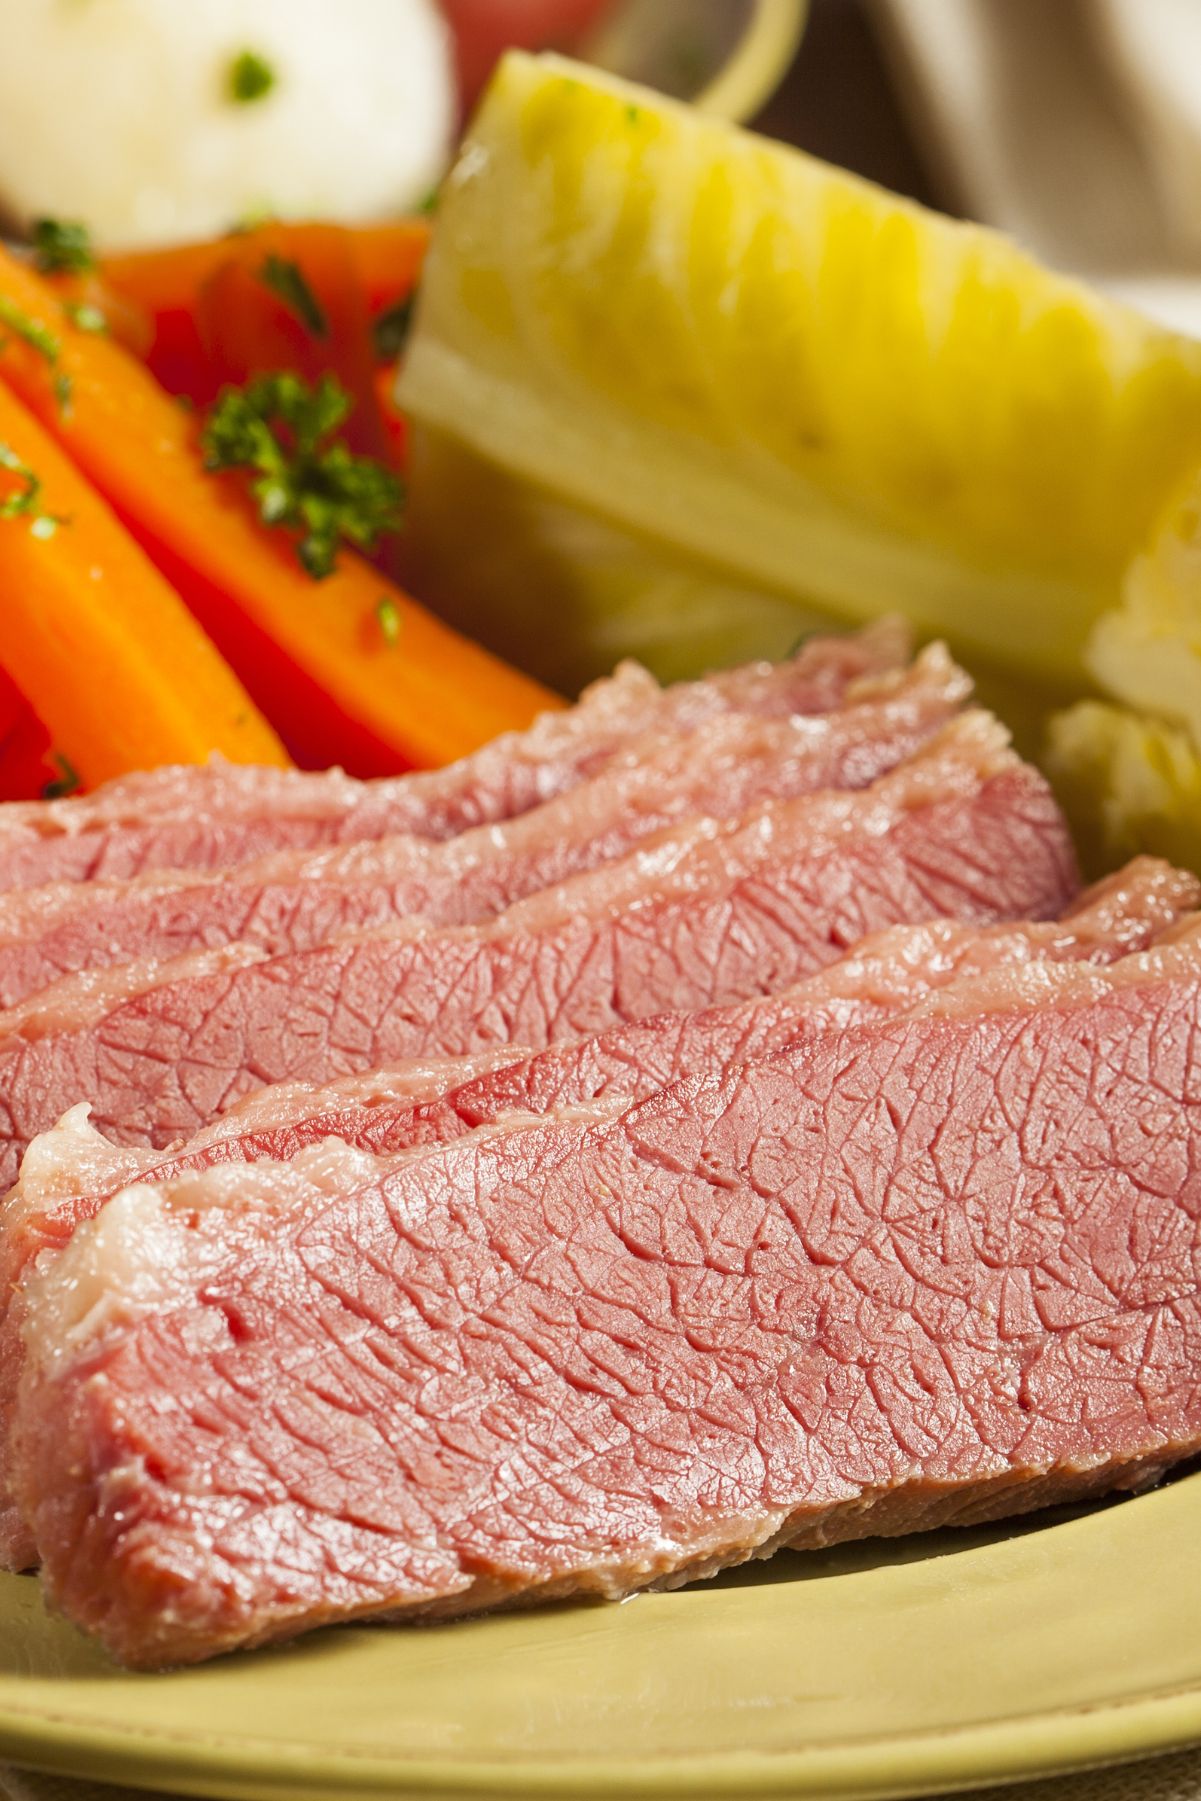 A plate of Irish corned beef sliced thin, accompanied by steamed cabbage wedges, whole carrots, and red potatoes, garnished with parsley